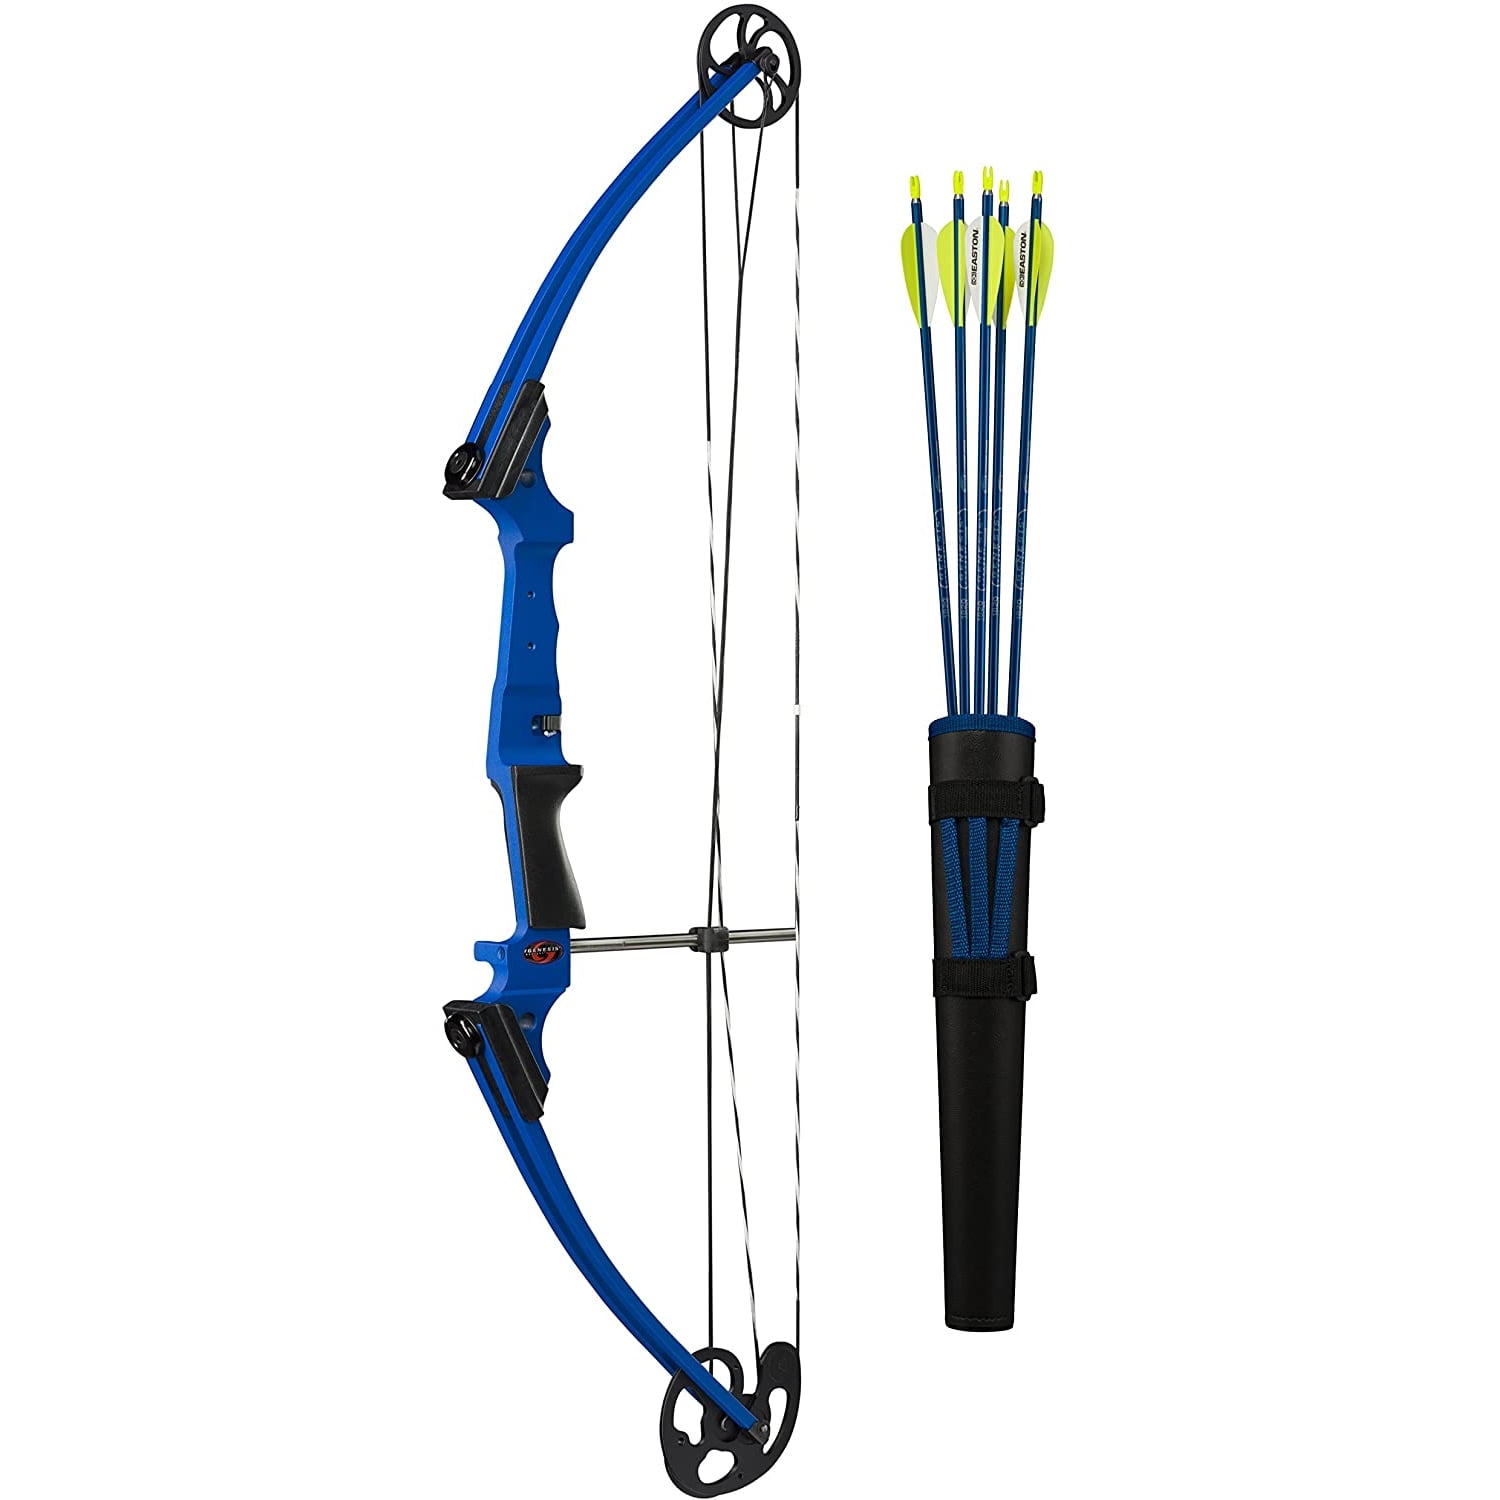 Right Handed Genesis Archery 10926 Original Blue Compound Training Bow Kit 